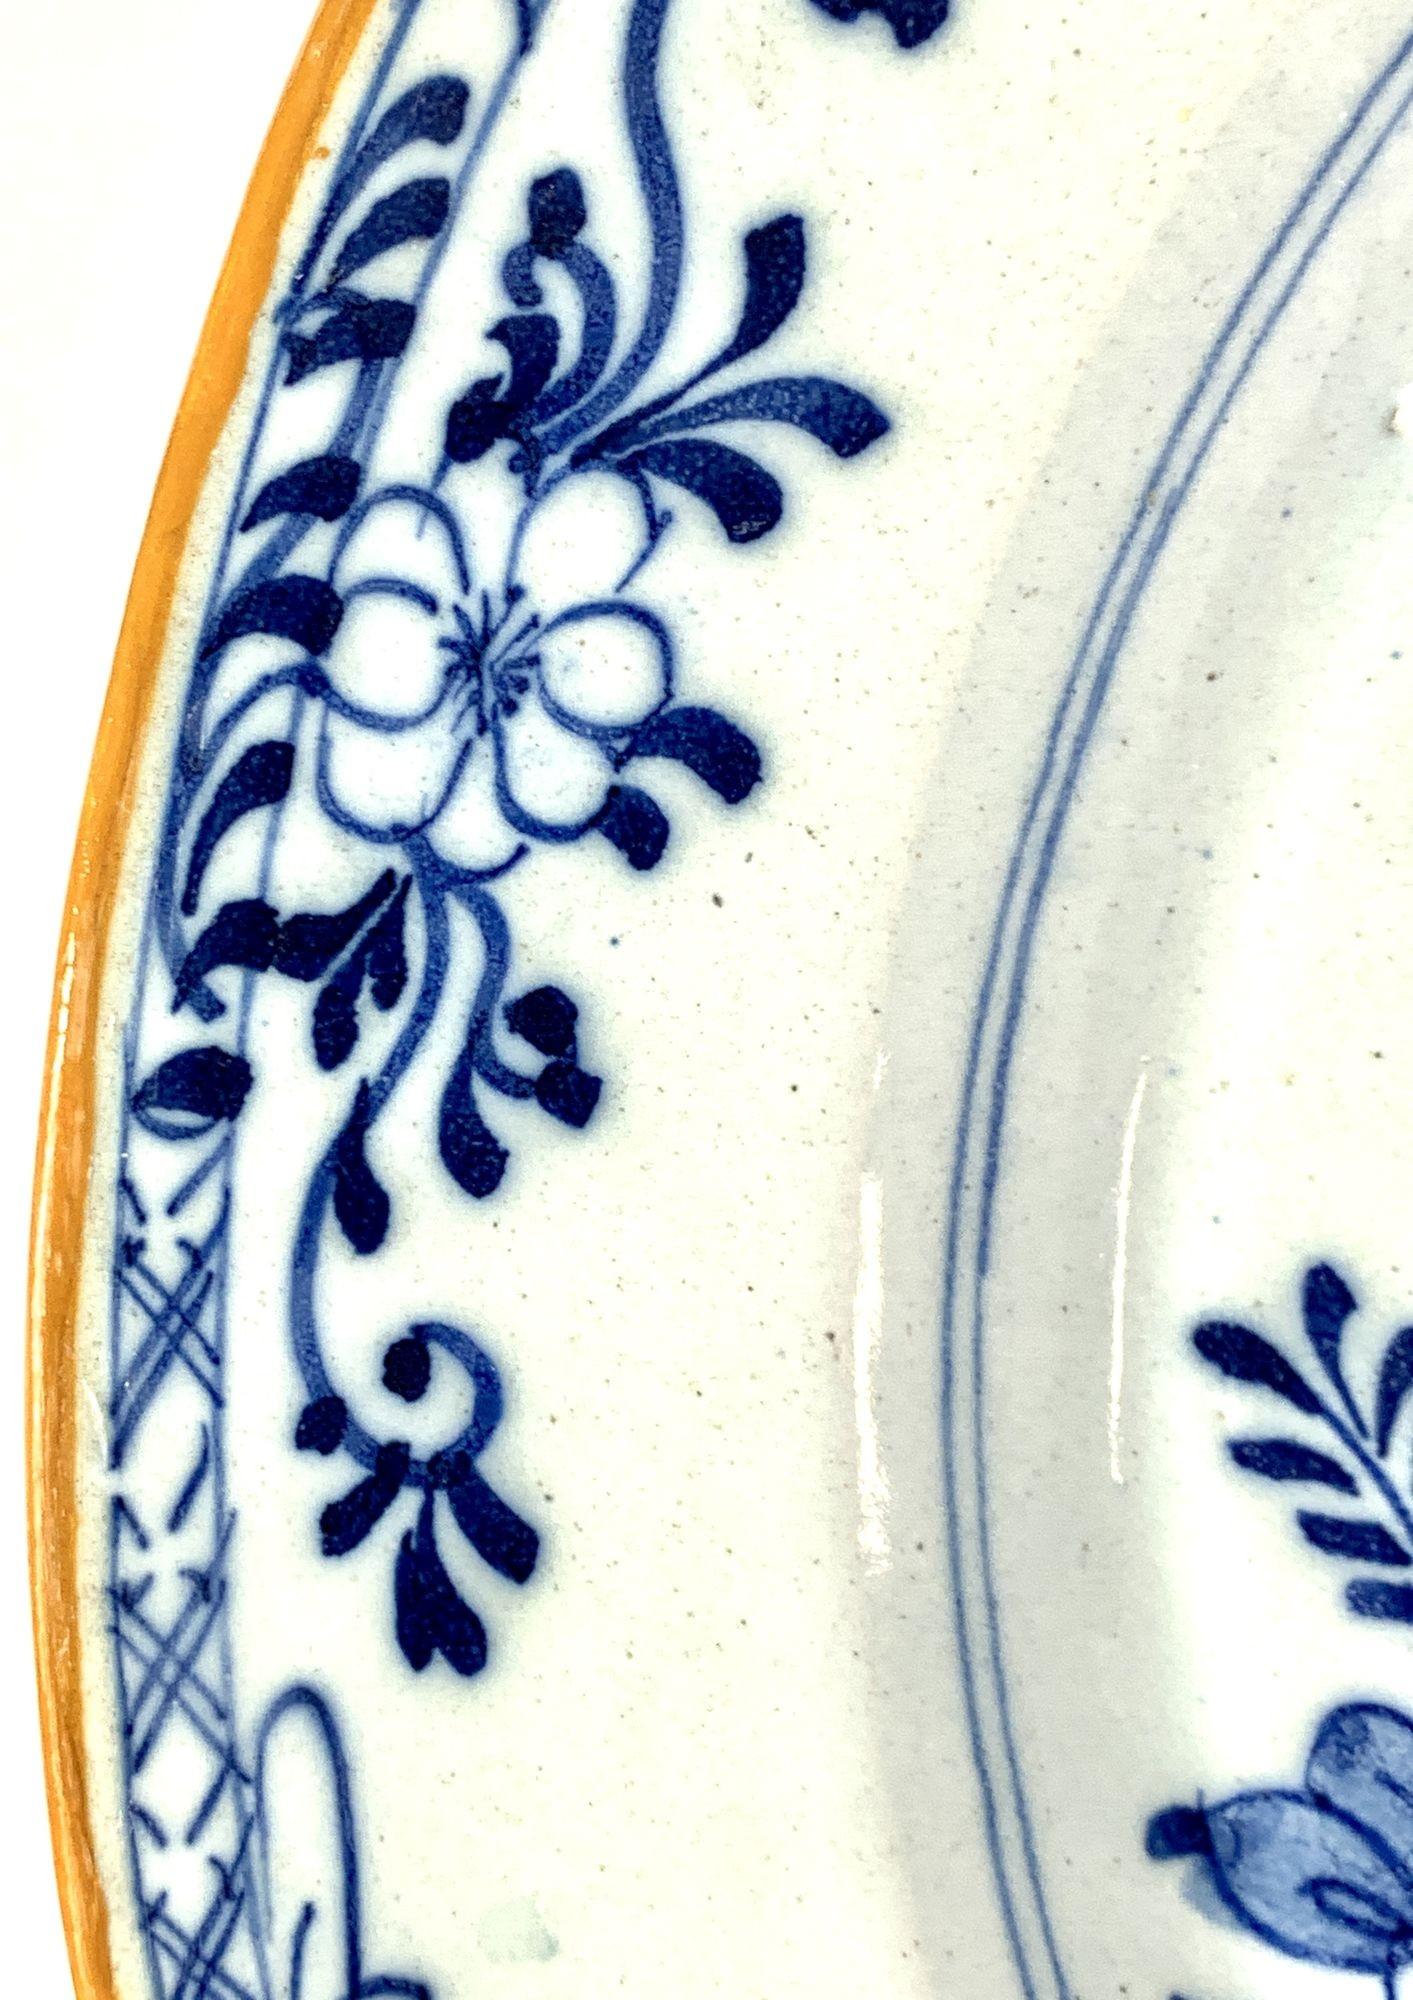 18th Century Blue and White Dutch Delft Charger Netherlands Circa 1780 with Mark of 